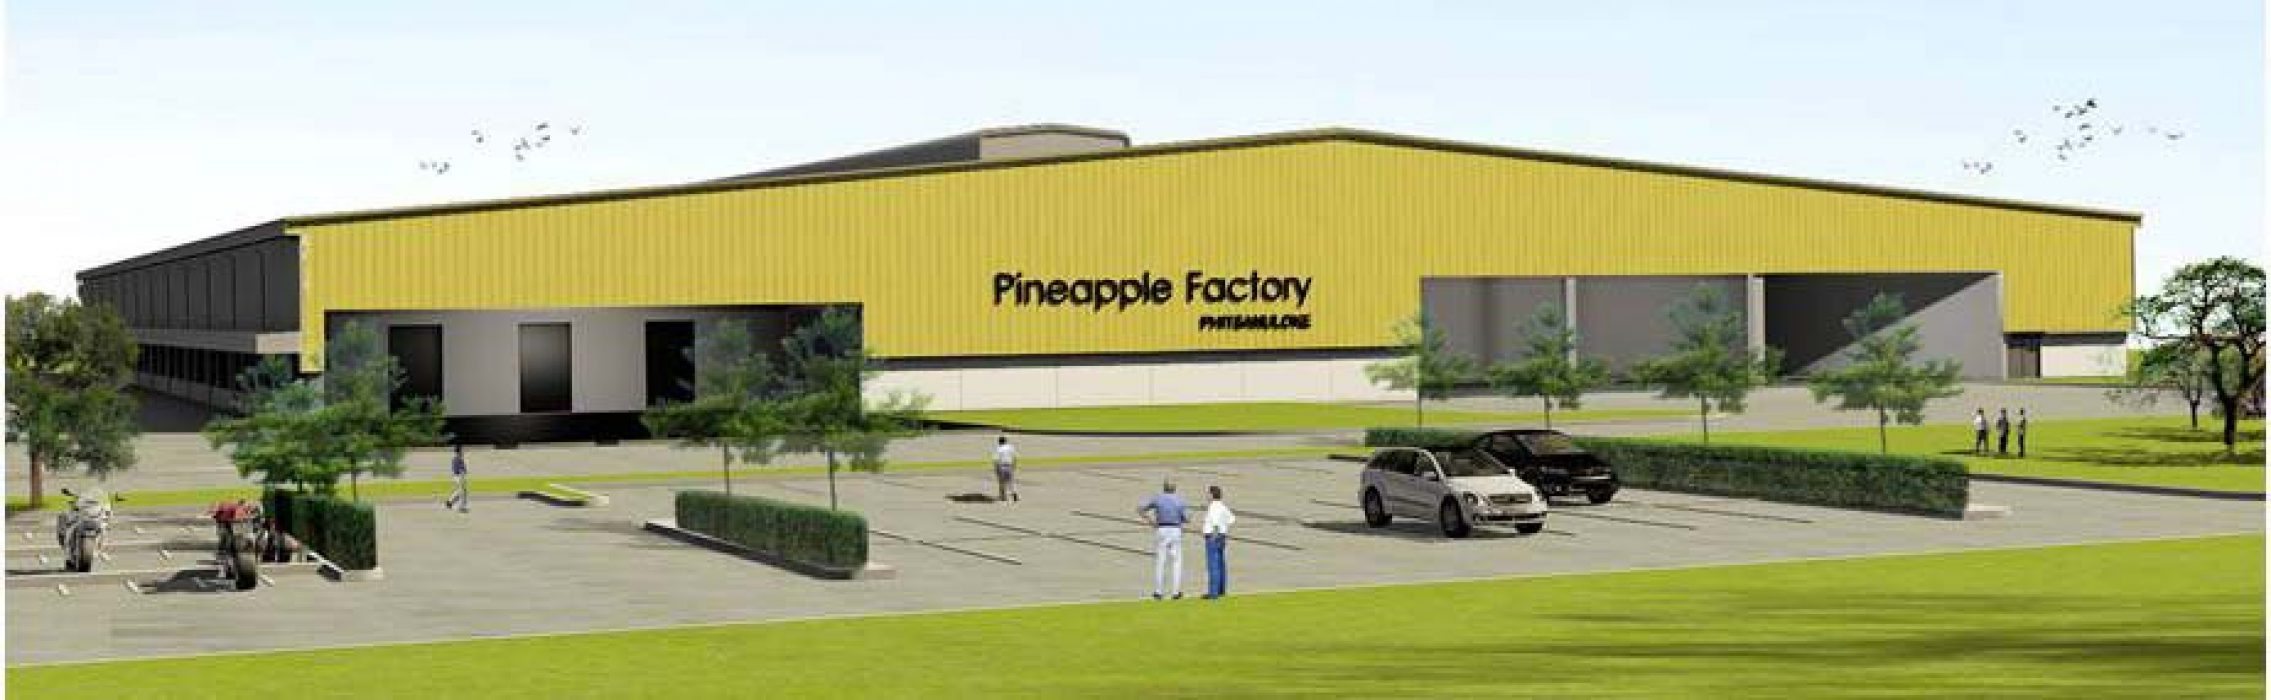 project-PineappleFactory02